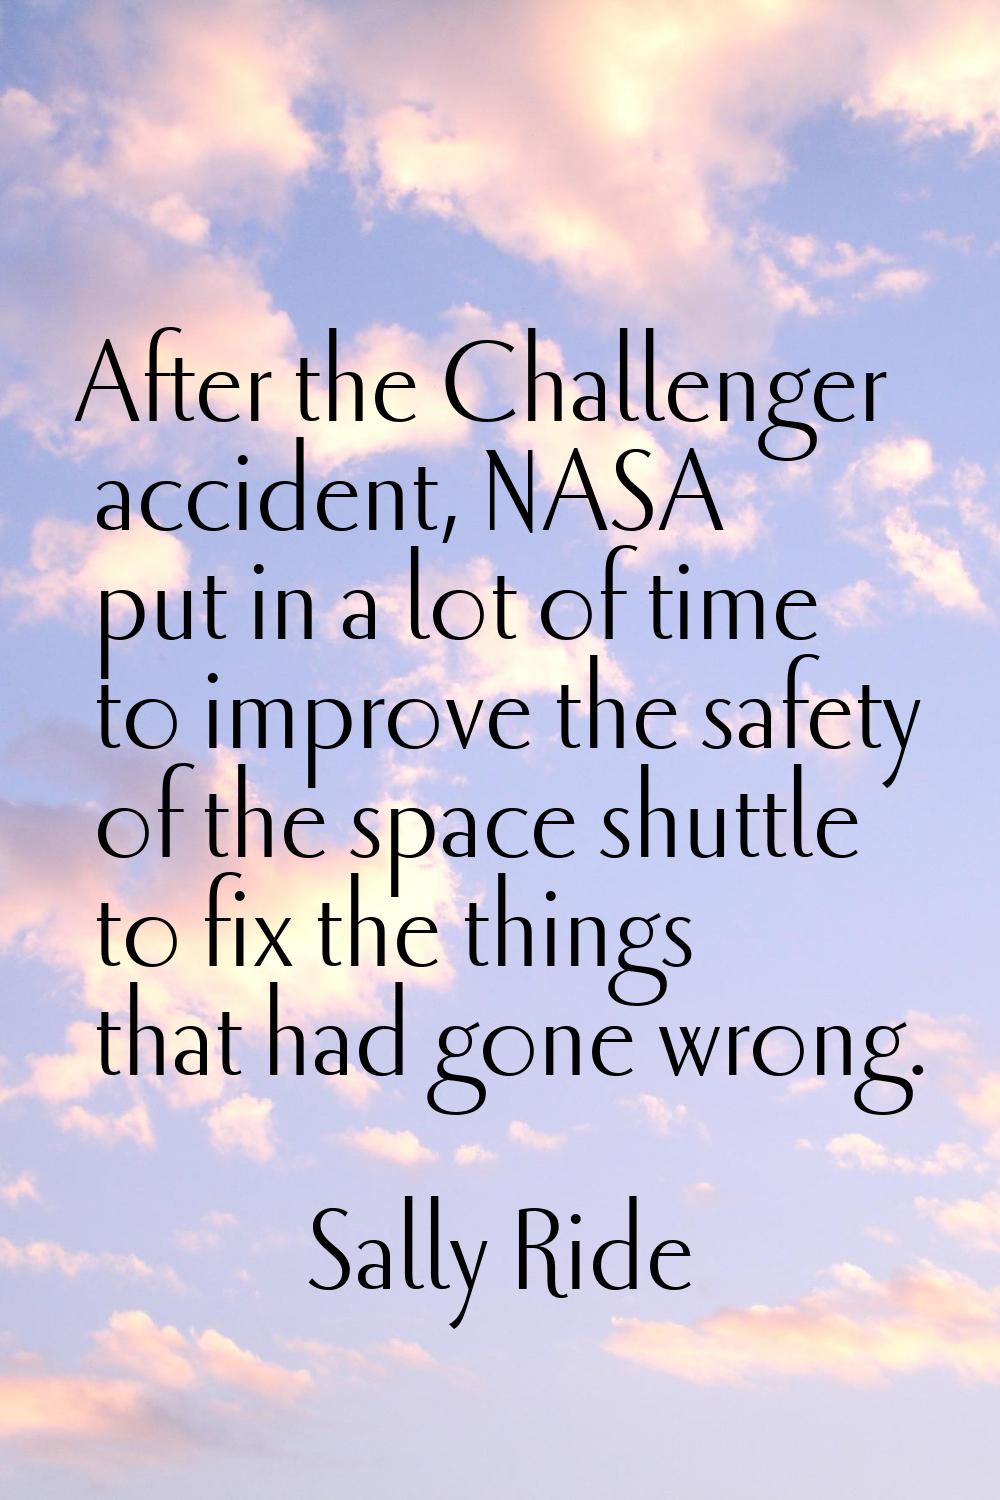 After the Challenger accident, NASA put in a lot of time to improve the safety of the space shuttle